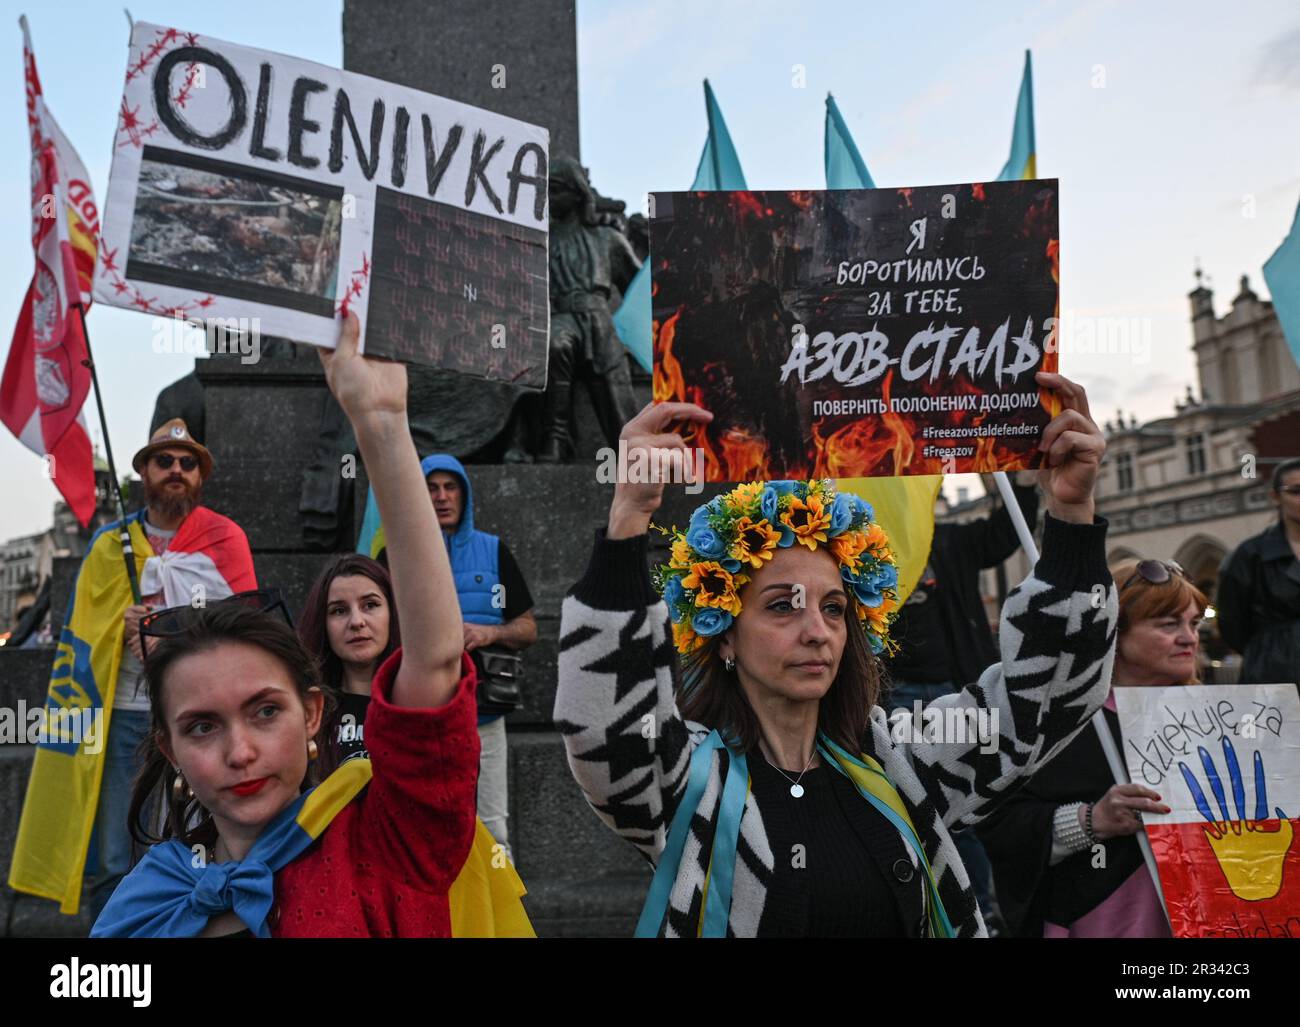 On May 21, 2023, members of the local Belarusian and Ukrainian diaspora, along with dedicated activists, came together in solidarity for the 'Freedom to Political Prisoners of Belarus' protest at the main Market Square in Krakow, Poland. Stock Photo